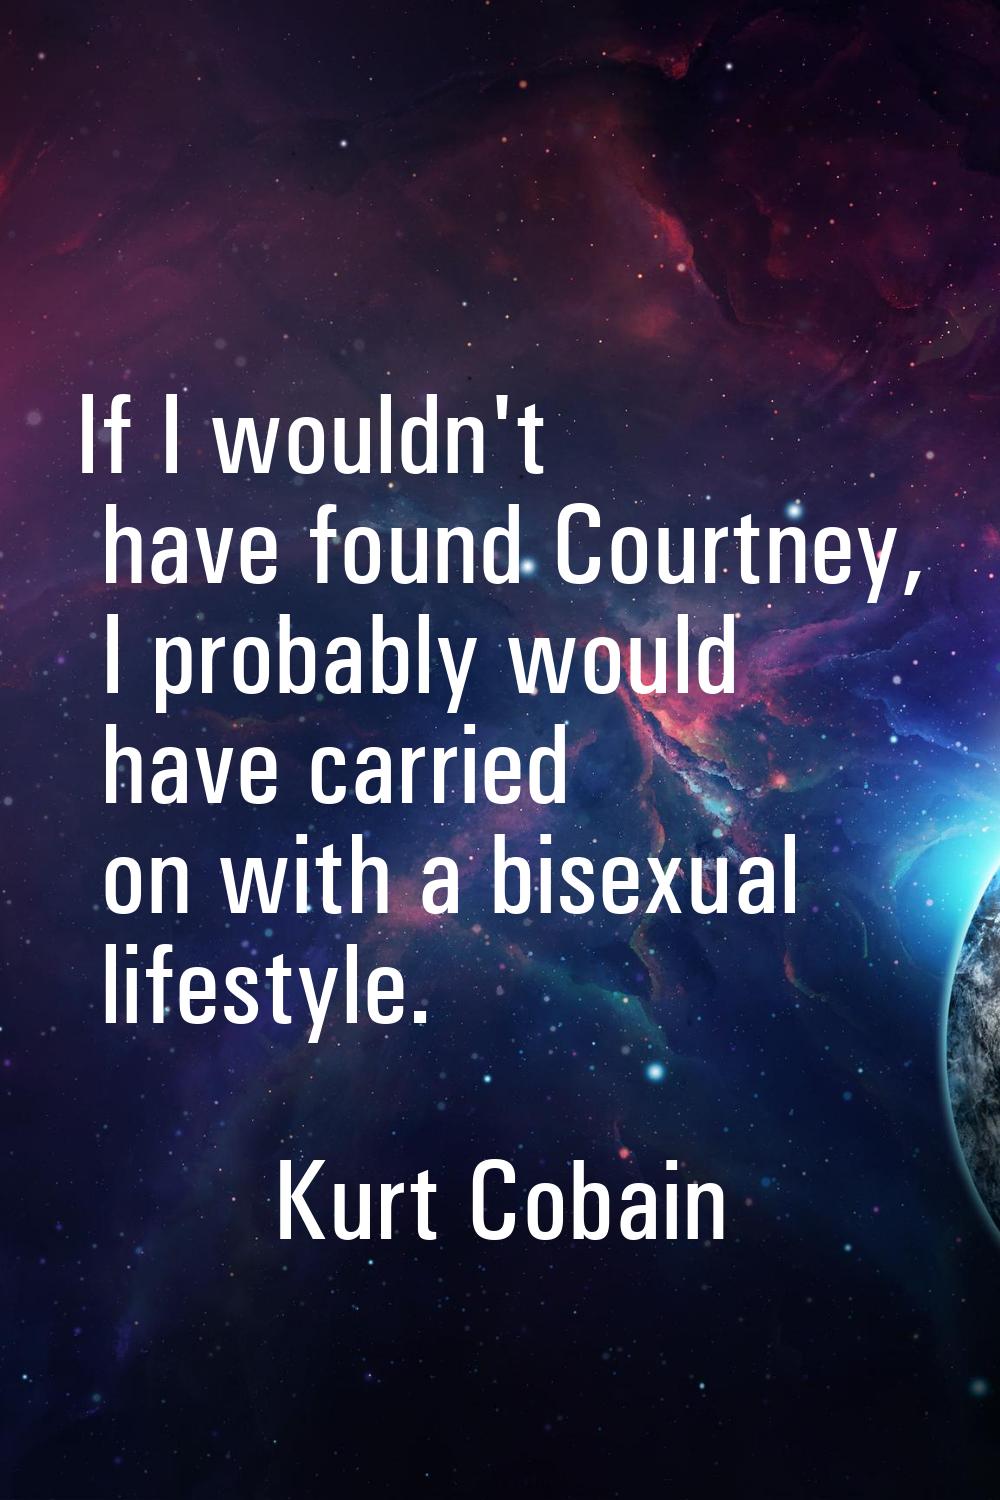 If I wouldn't have found Courtney, I probably would have carried on with a bisexual lifestyle.